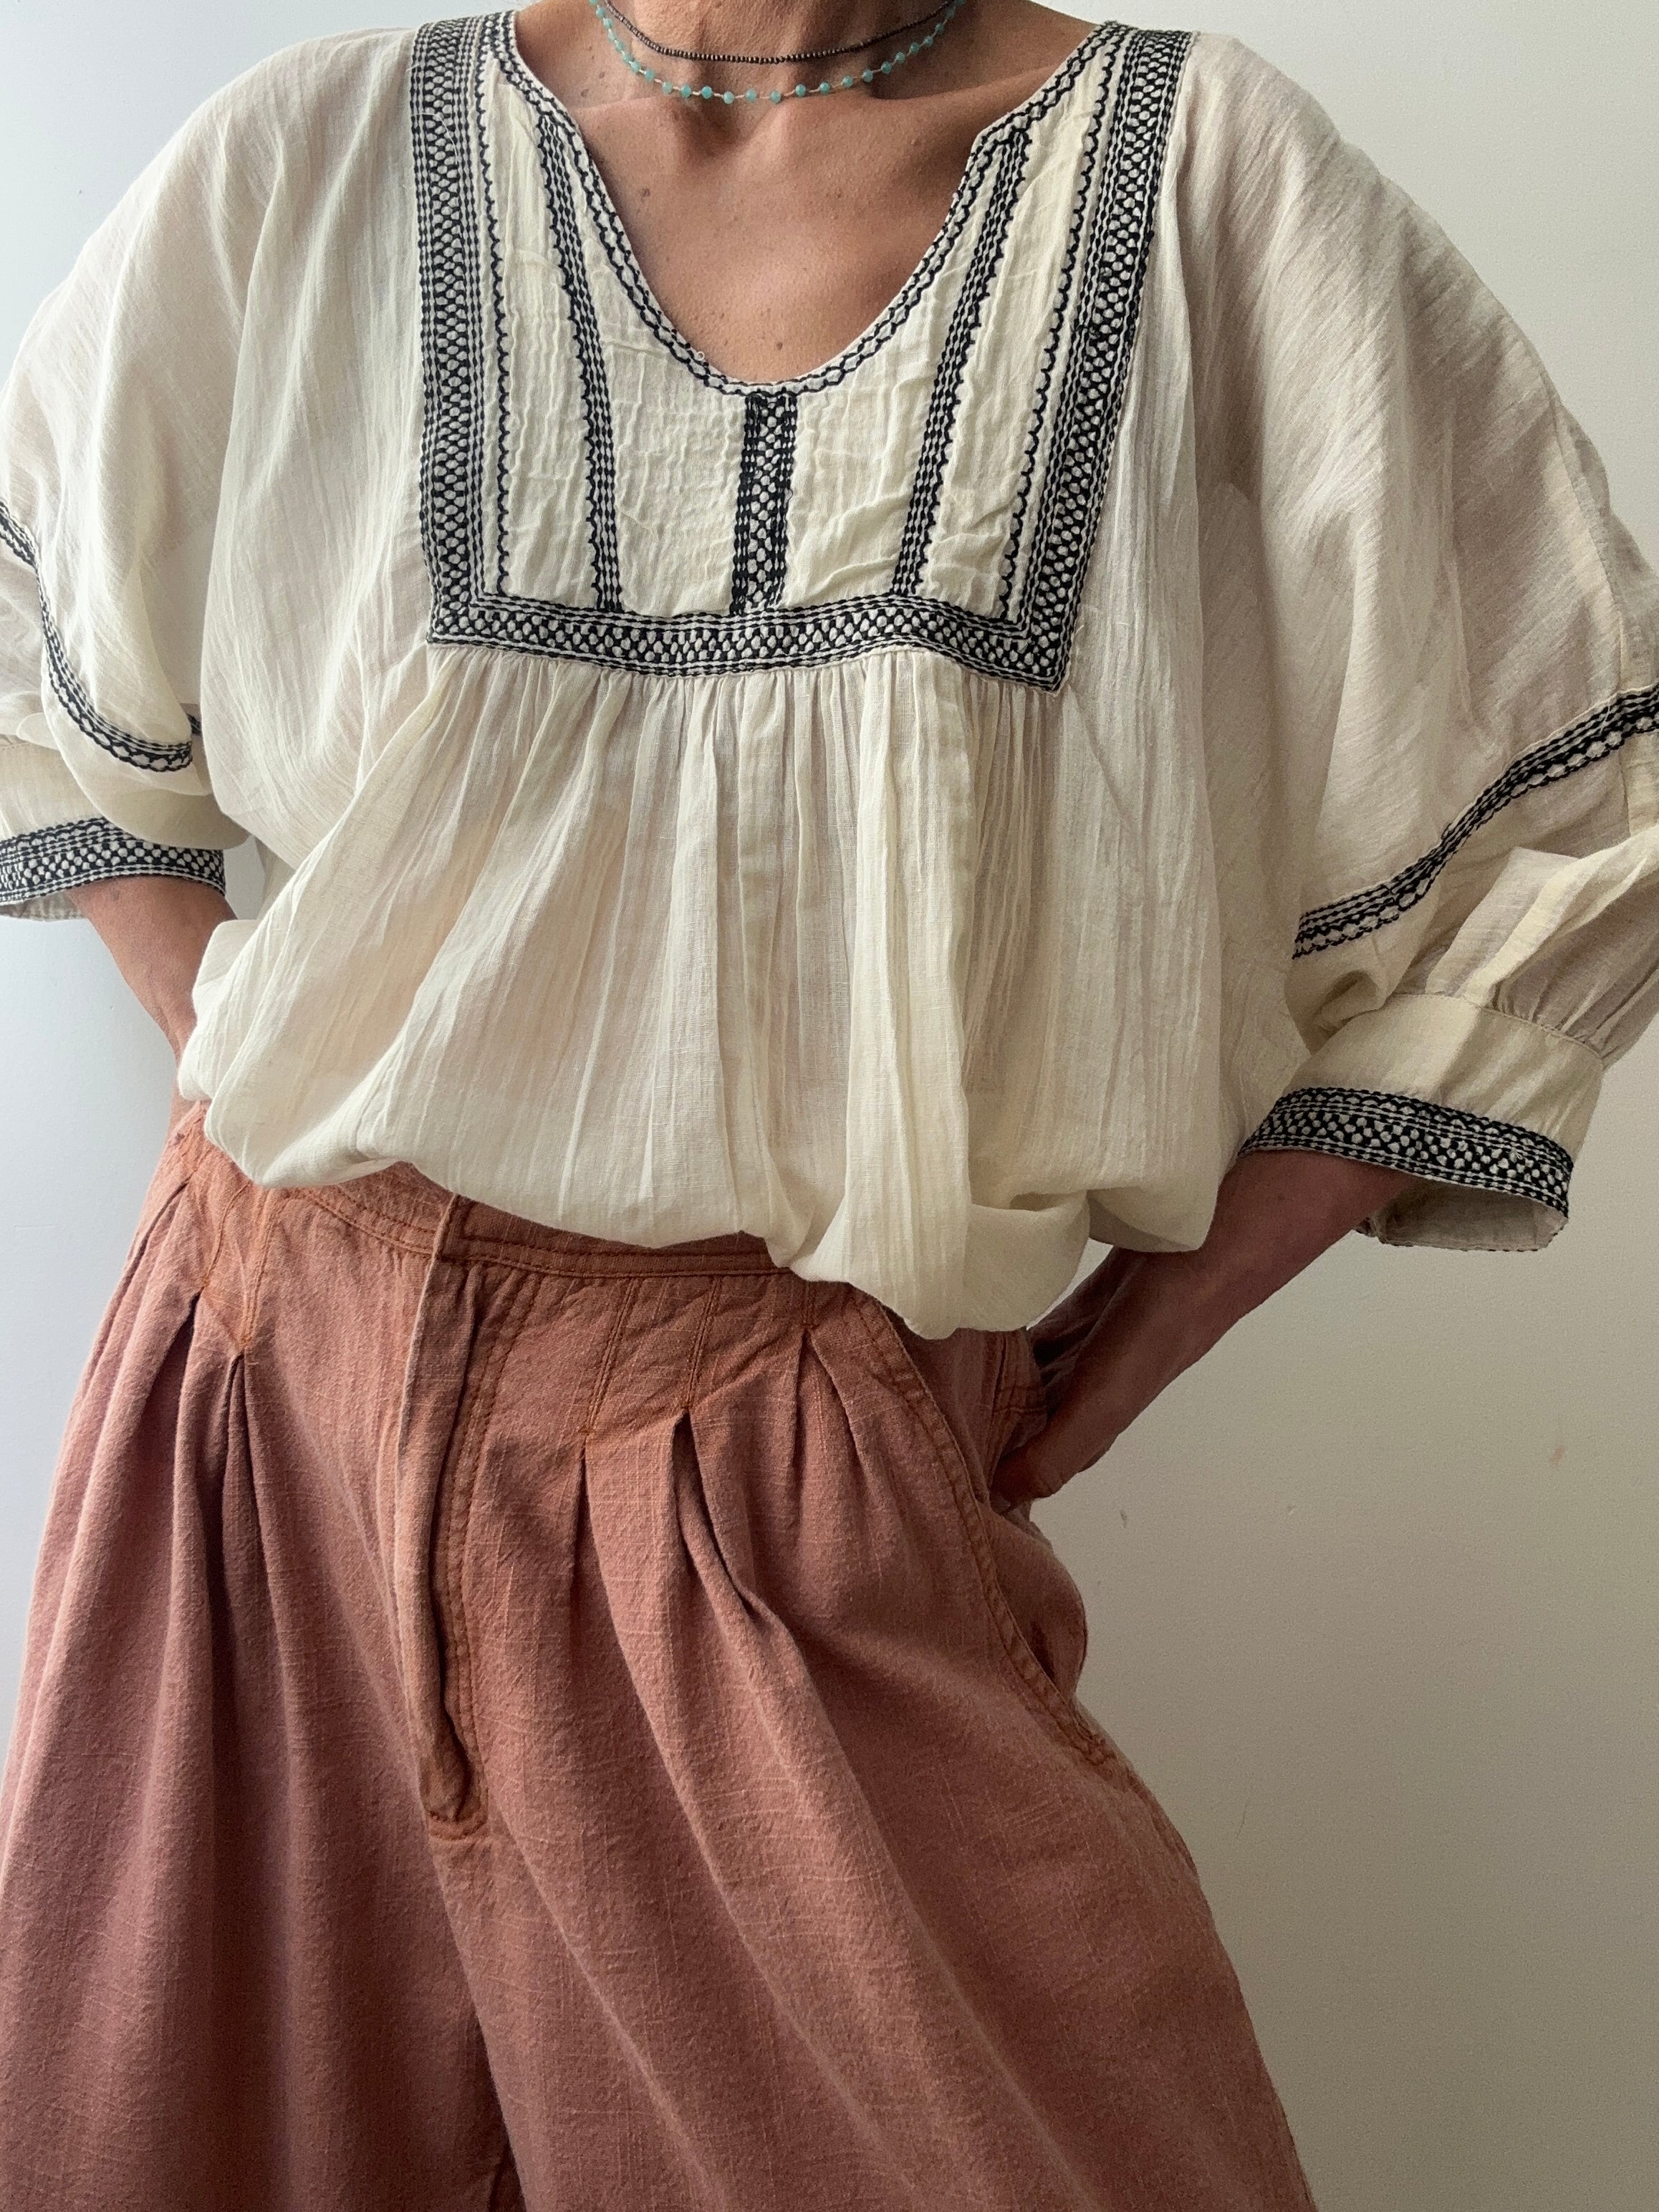 Jetsetbohemian Tops One Size Cotton Bib Blouse in Natural